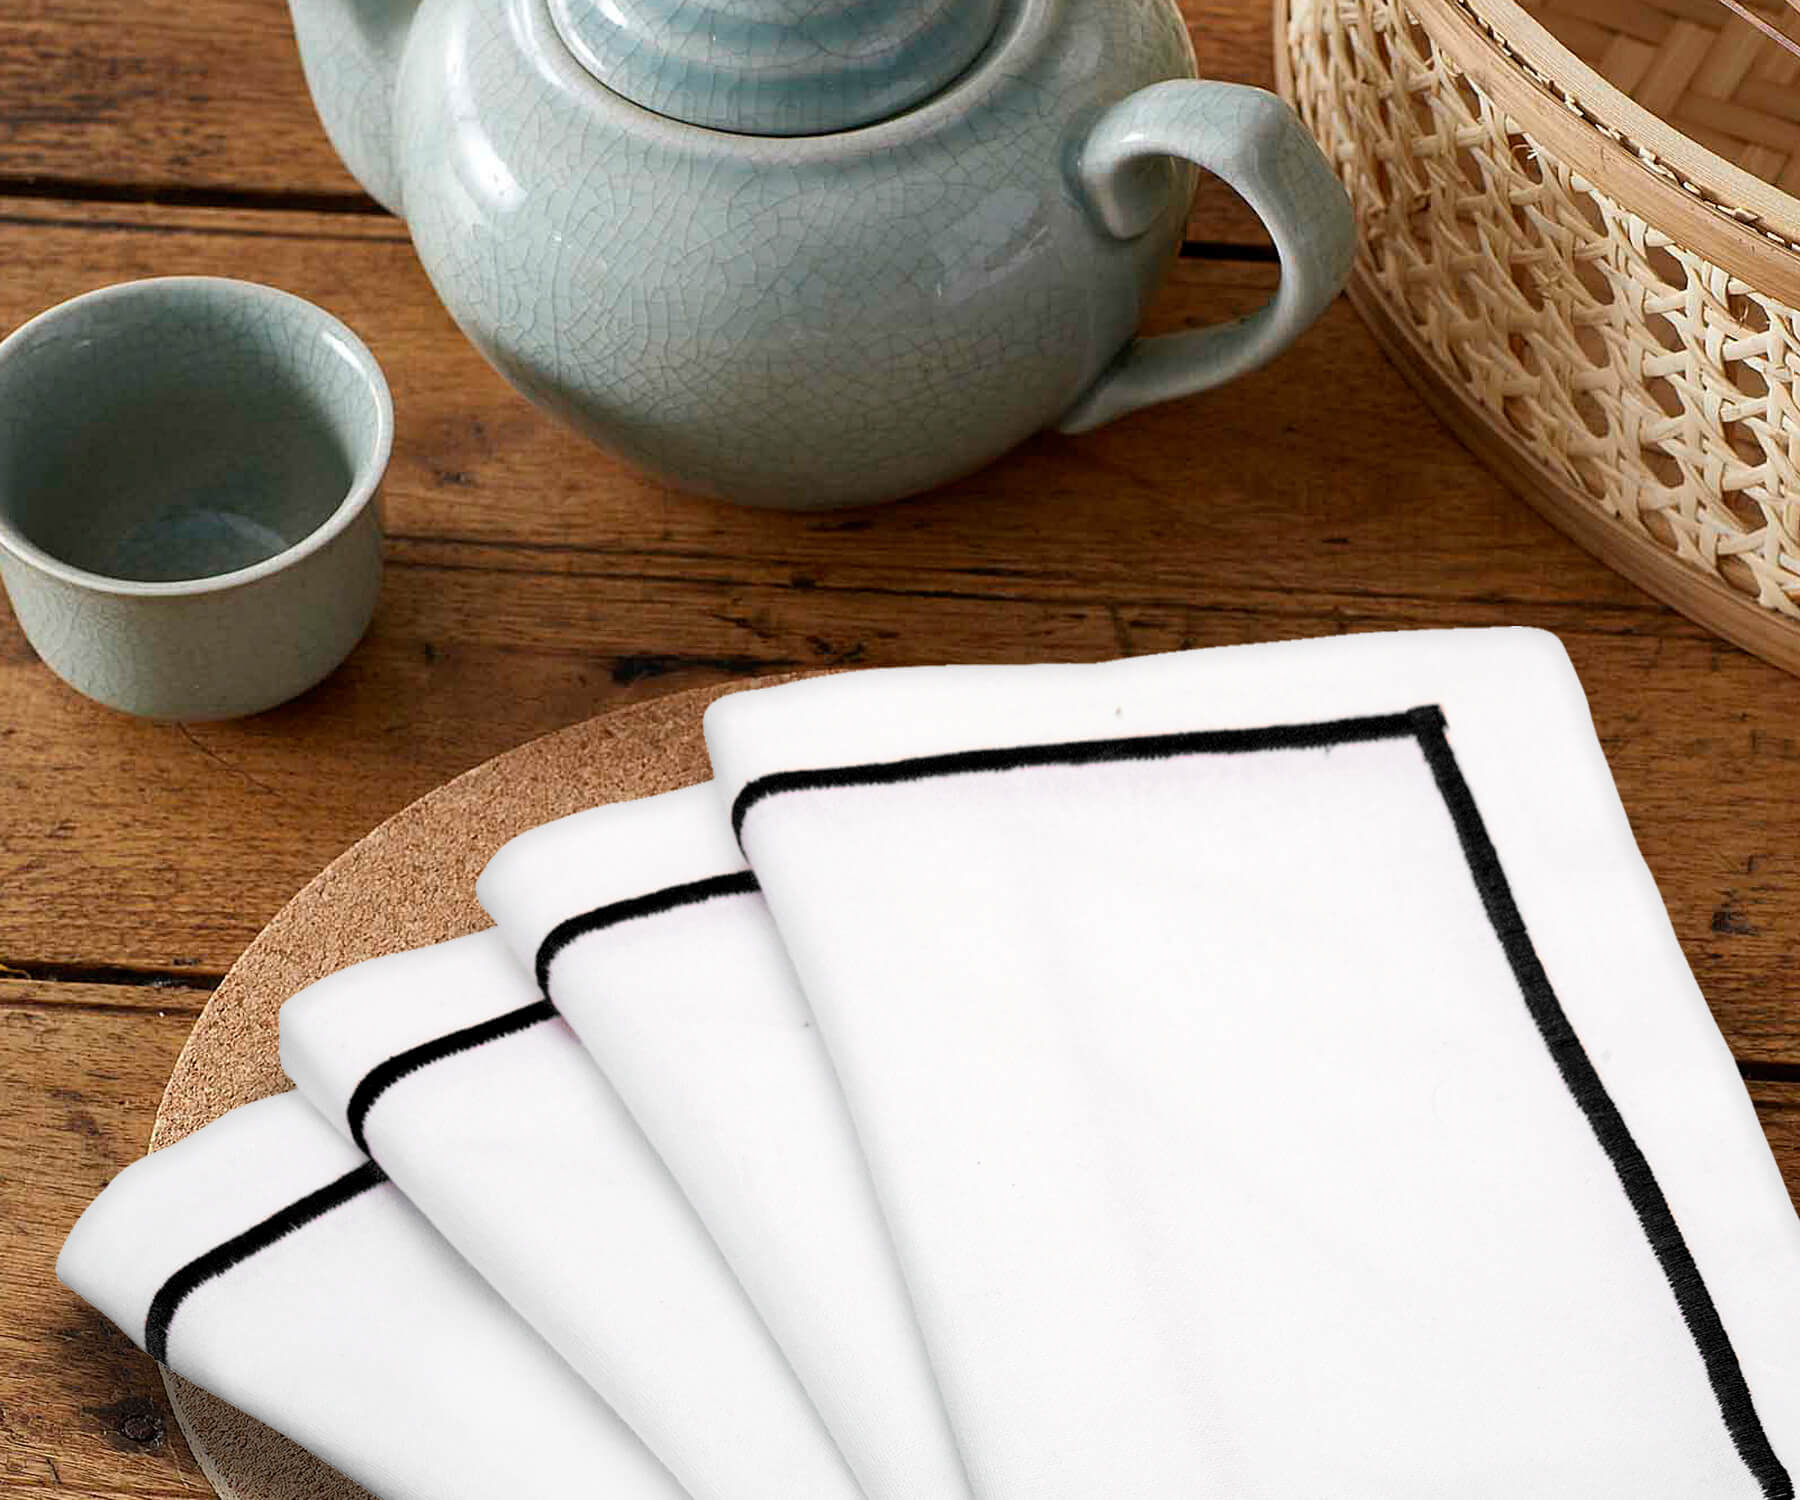 Single white dinner napkin with black trim on a wooden table